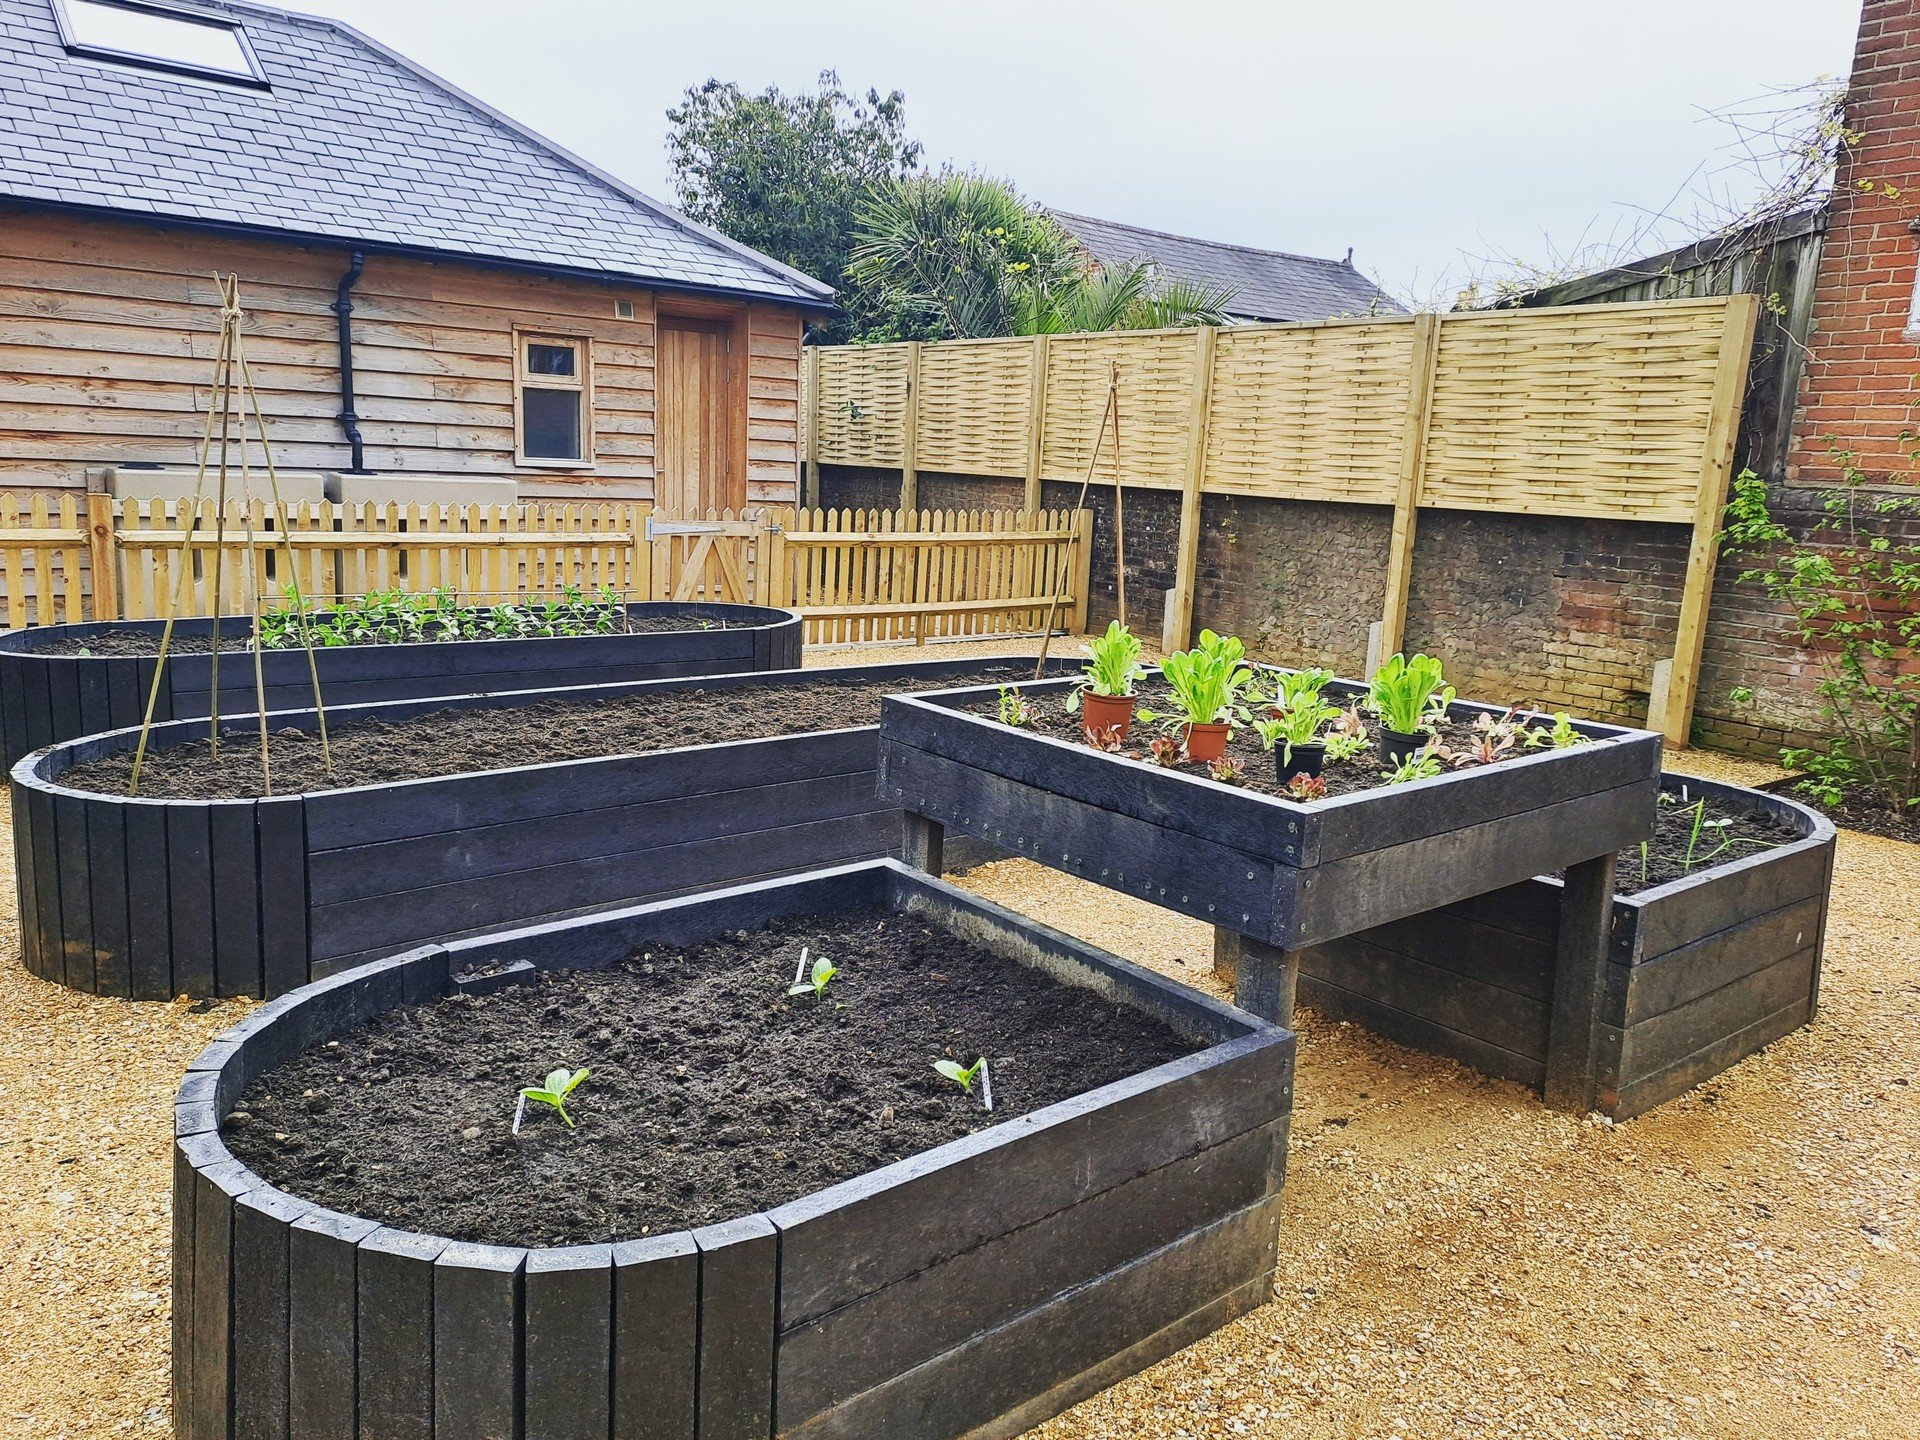 Our #HopeStreet kitchen garden is growing! At the moment we are growing fresh herbs, broad beans, tomatoes, squash, courgettes, Brussels sprouts, lettuce, tomatoes, cucumber, chillis, and pumpkins. We also have dwarf apple, pear and plum trees on the